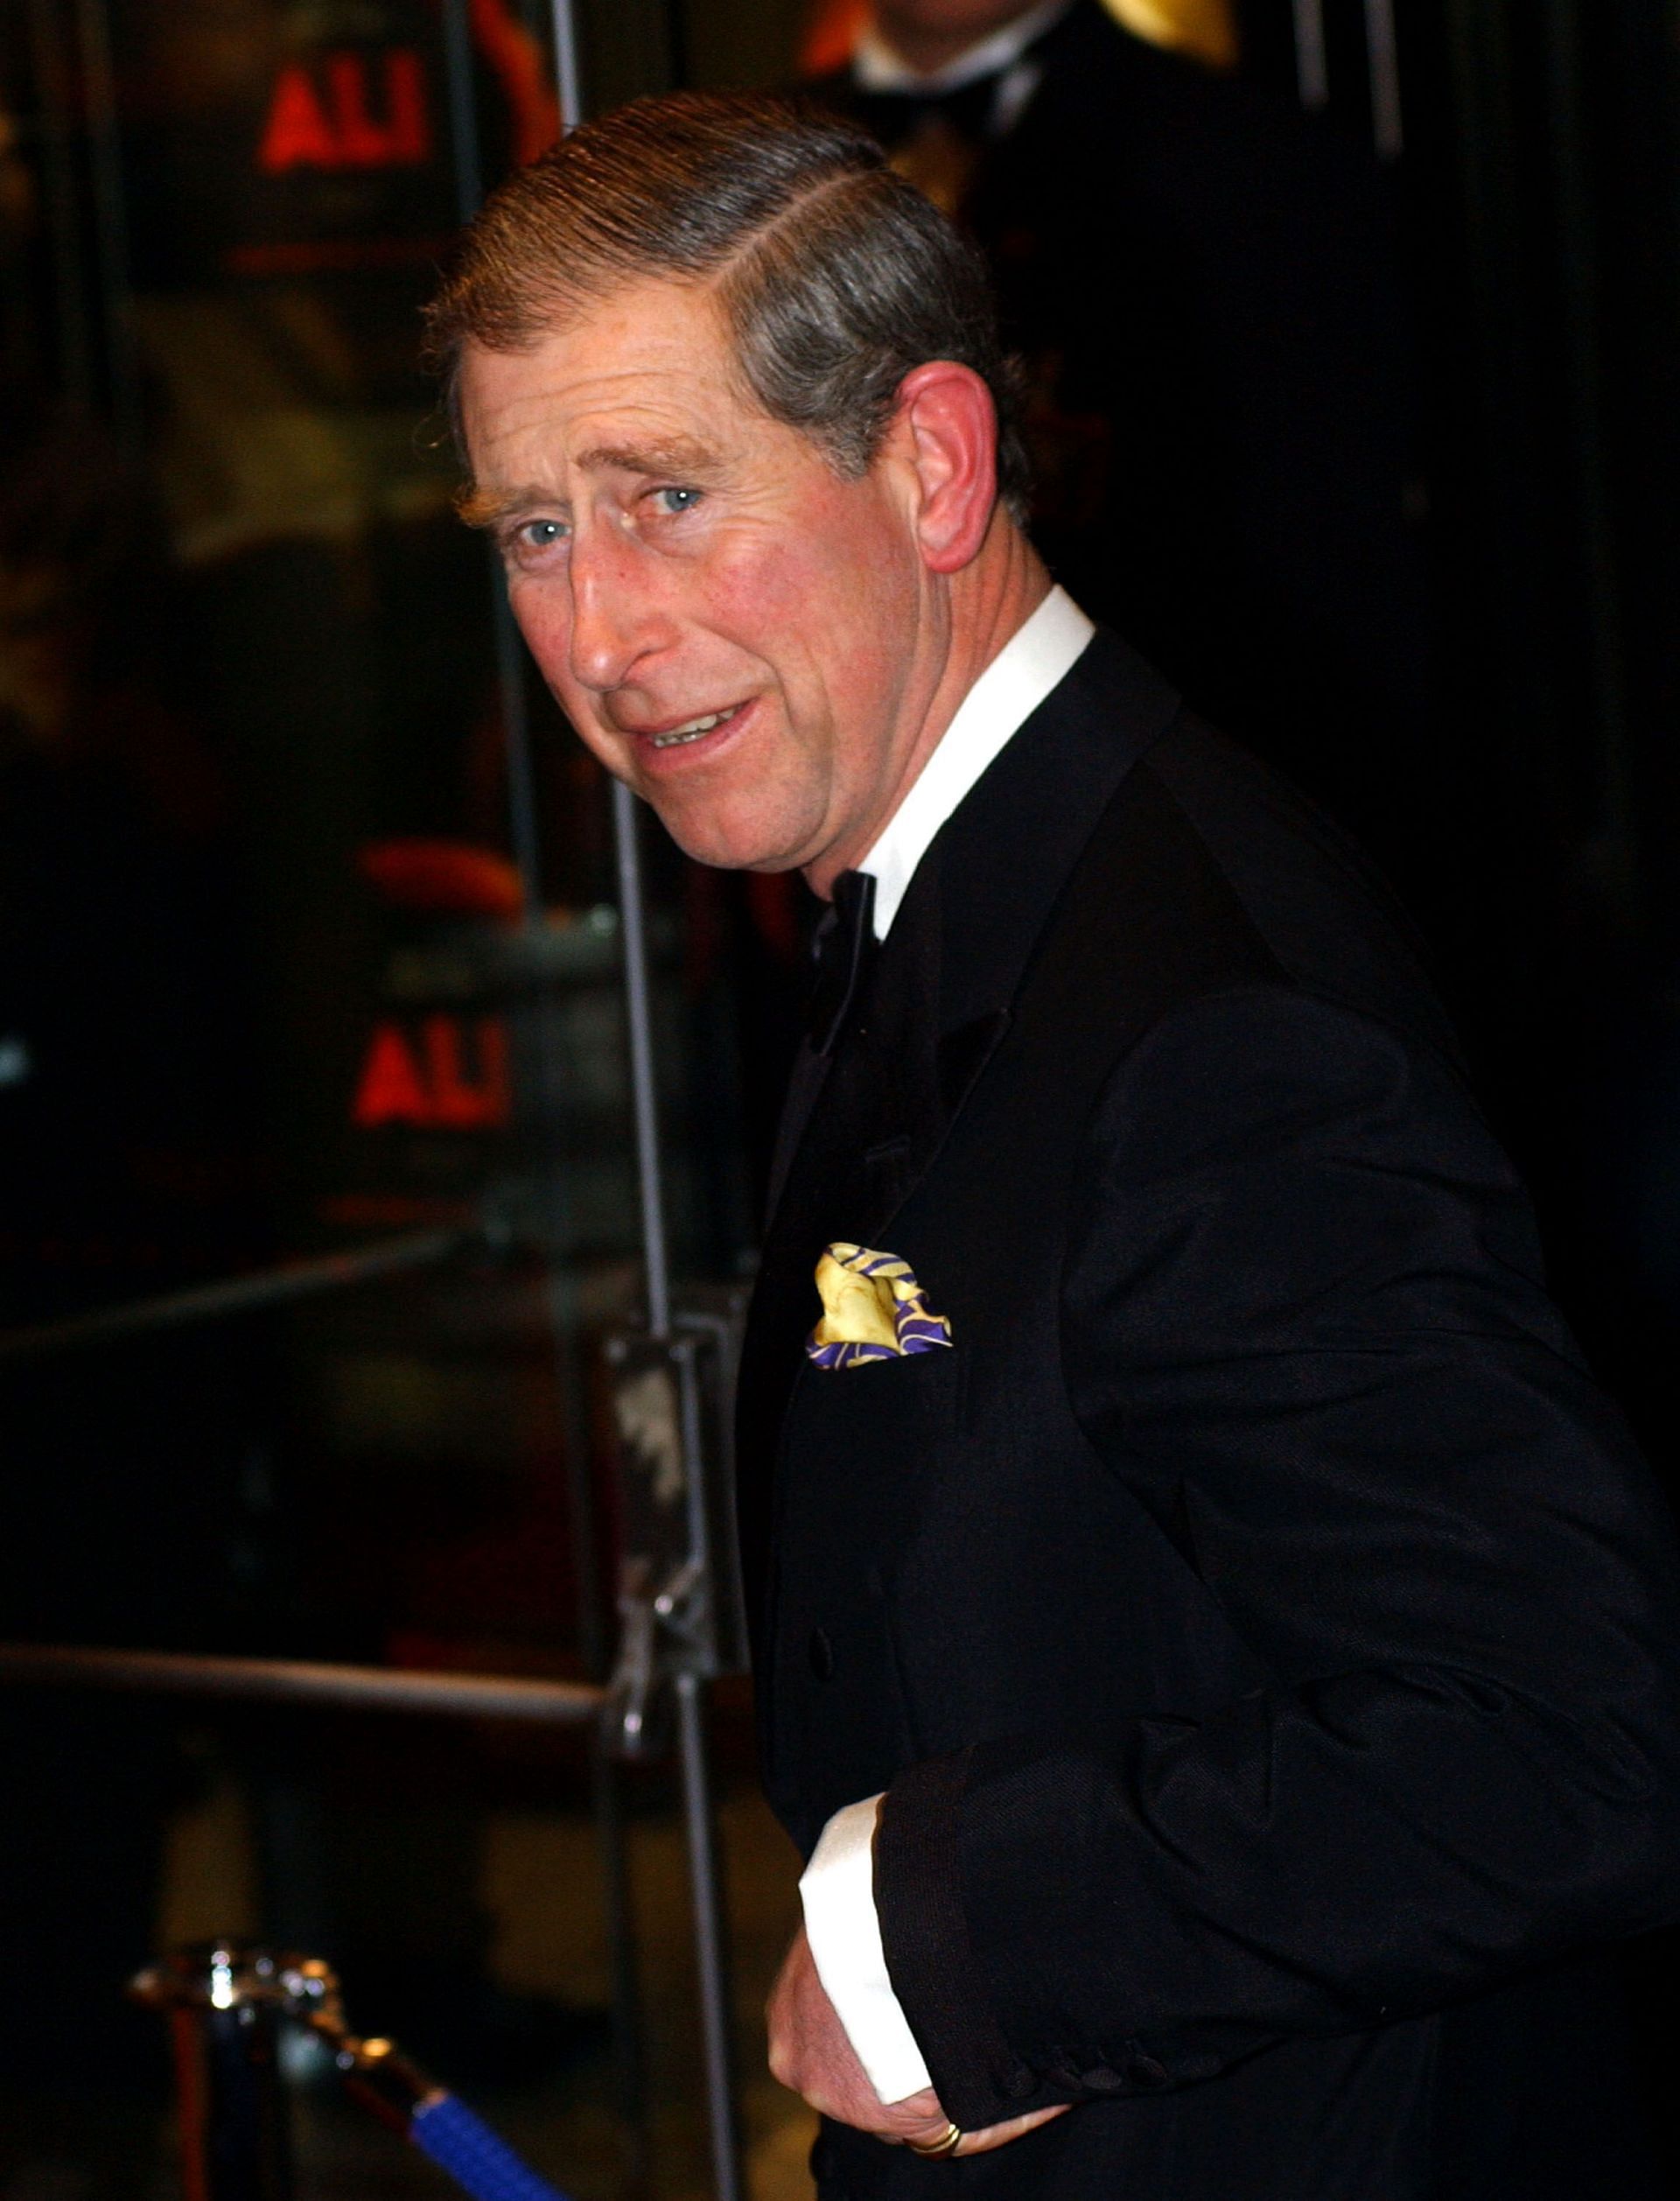 Prince Charles at Ali World Premiere in 2001 (Image via Getty)